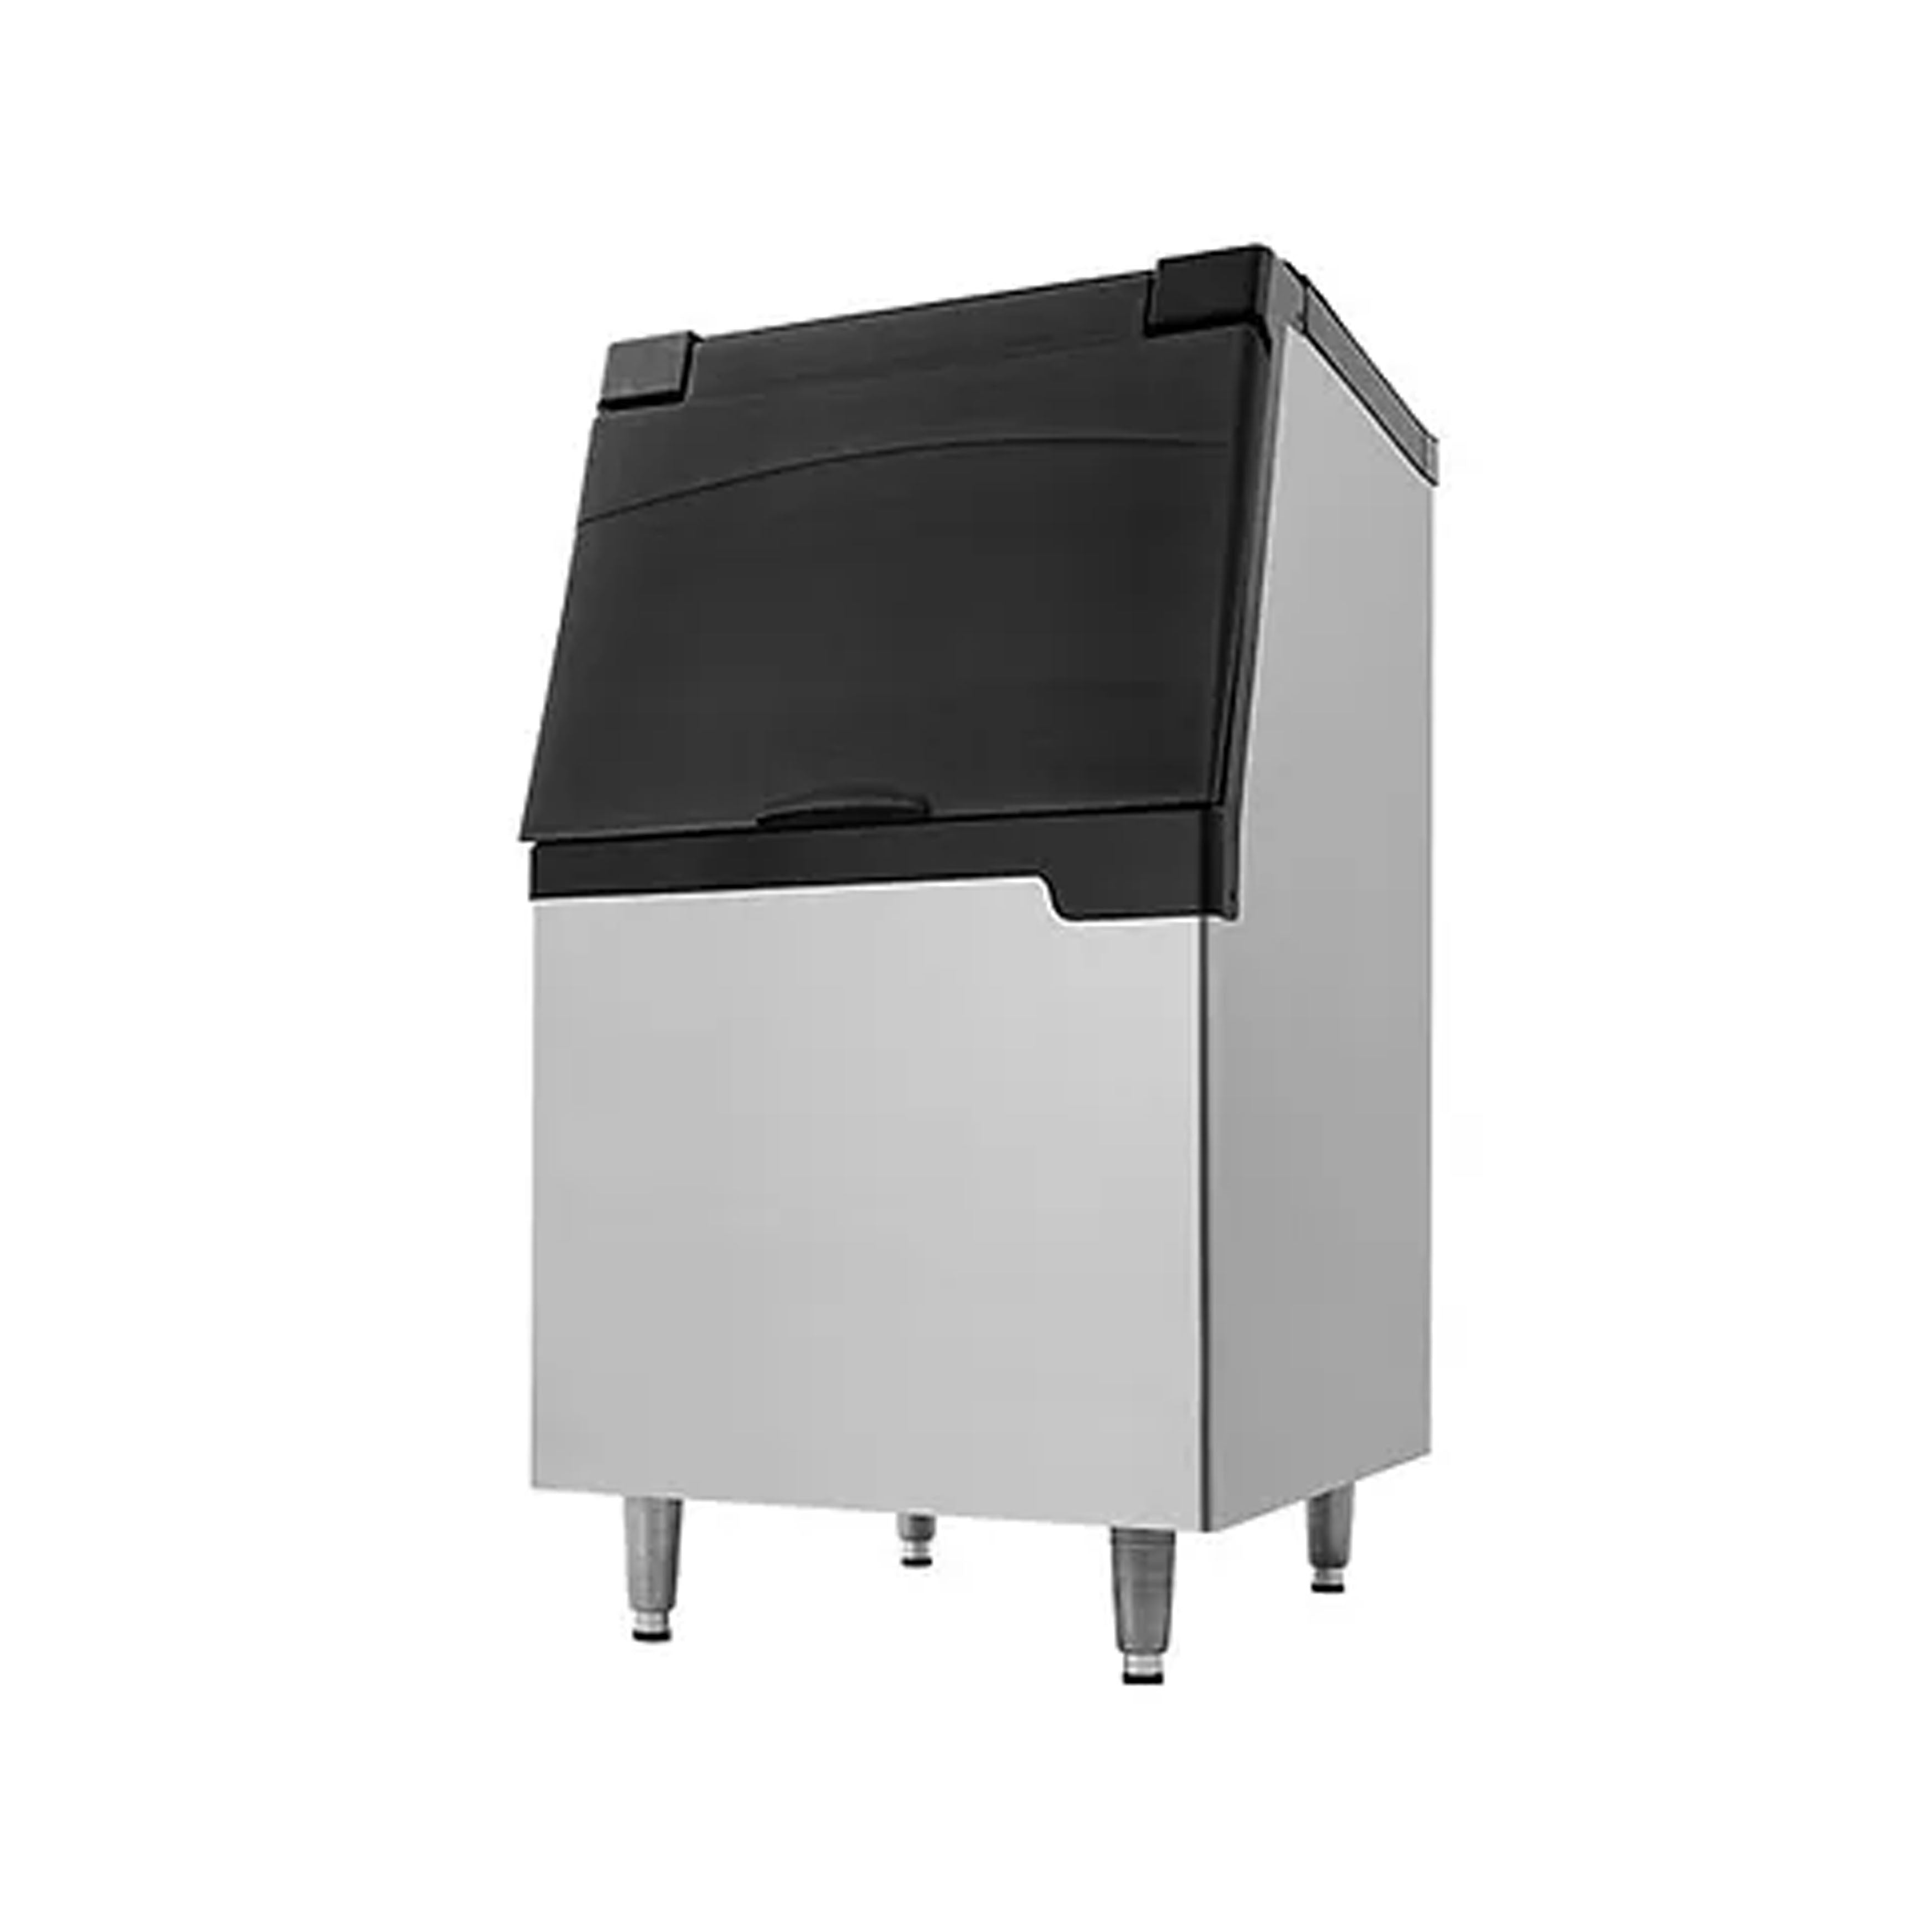 Icetro - IB-044, Commercial 30" wide 440lbs Stainless steel Ice Bin